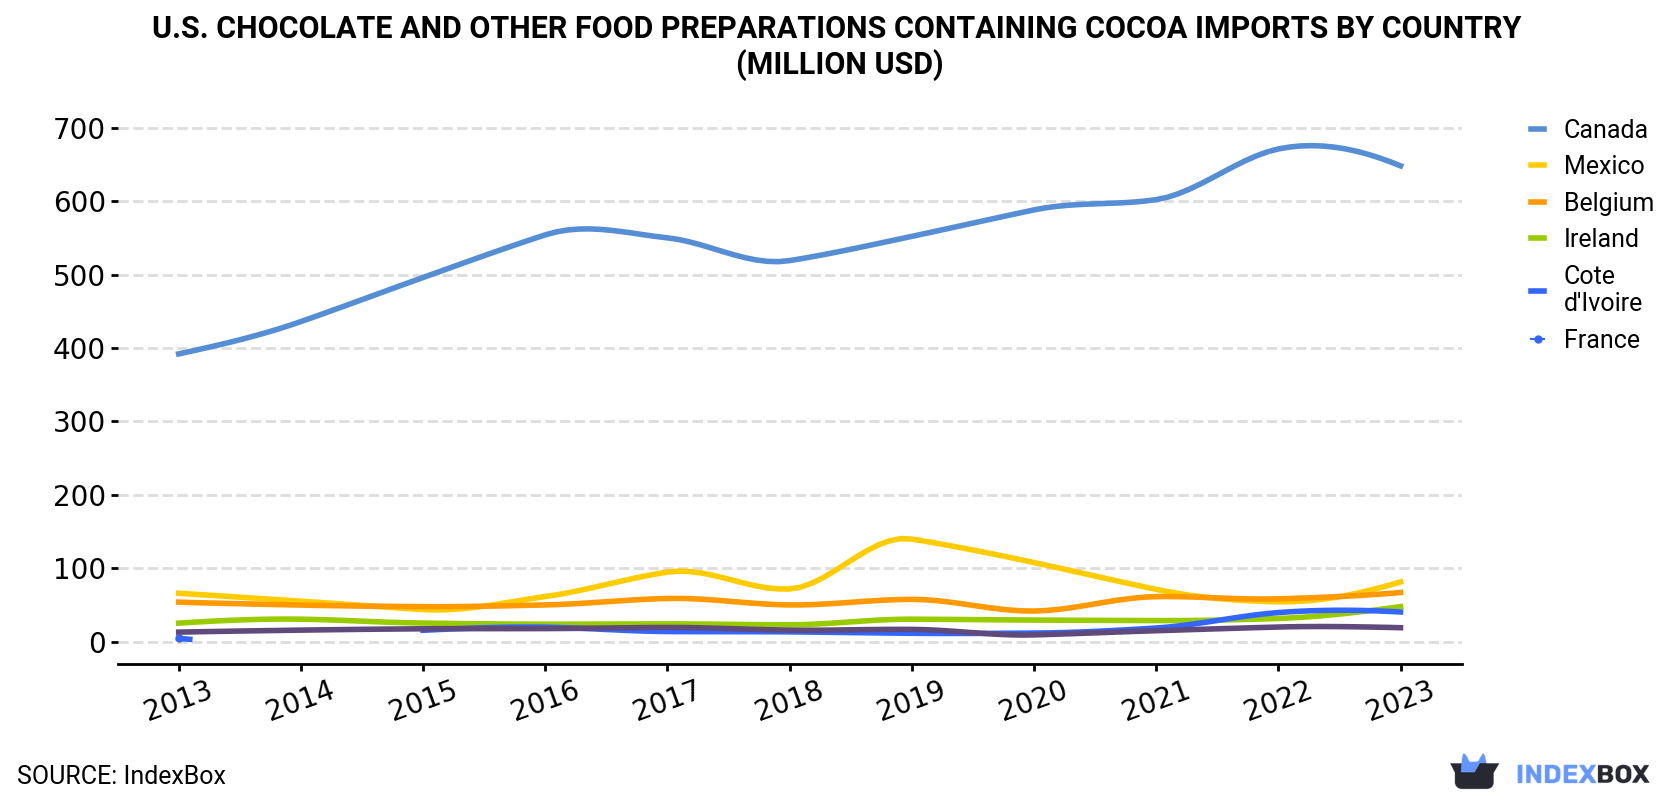 U.S. Chocolate And Other Food Preparations Containing Cocoa Imports By Country (Million USD)